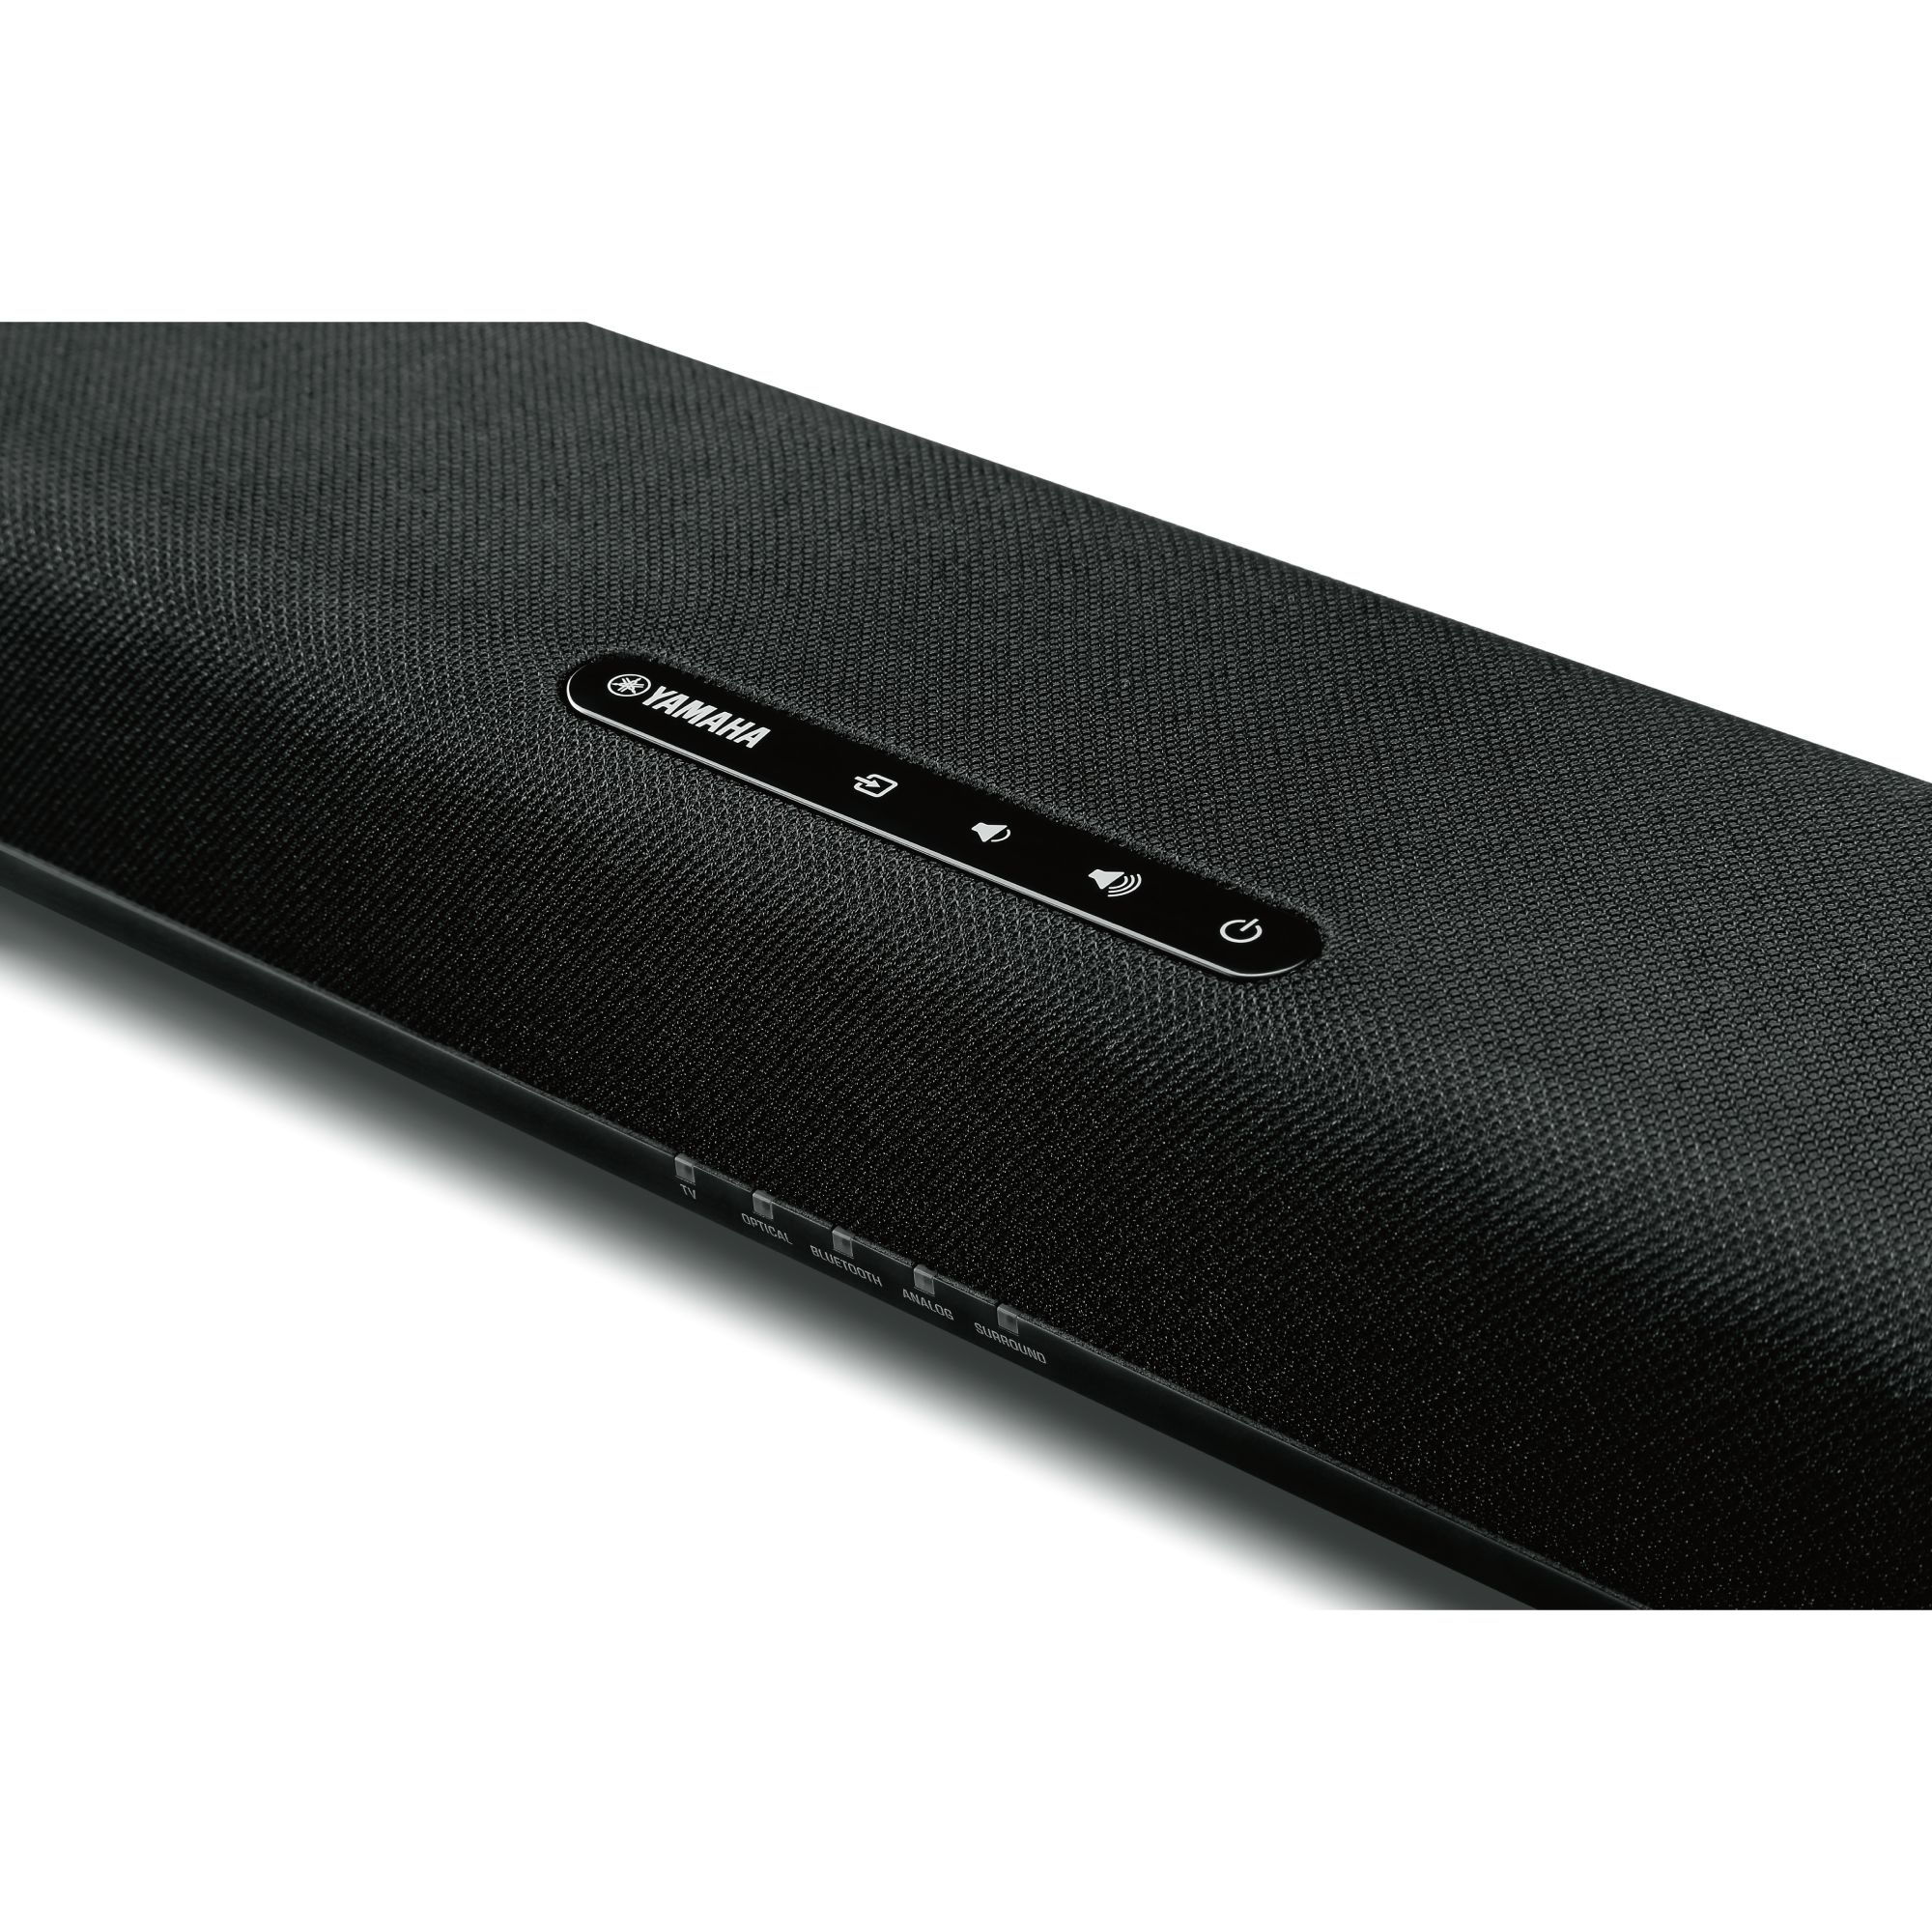 Support: SR-C20A Sound Bar with Built-in Subwoofer - Yamaha USA